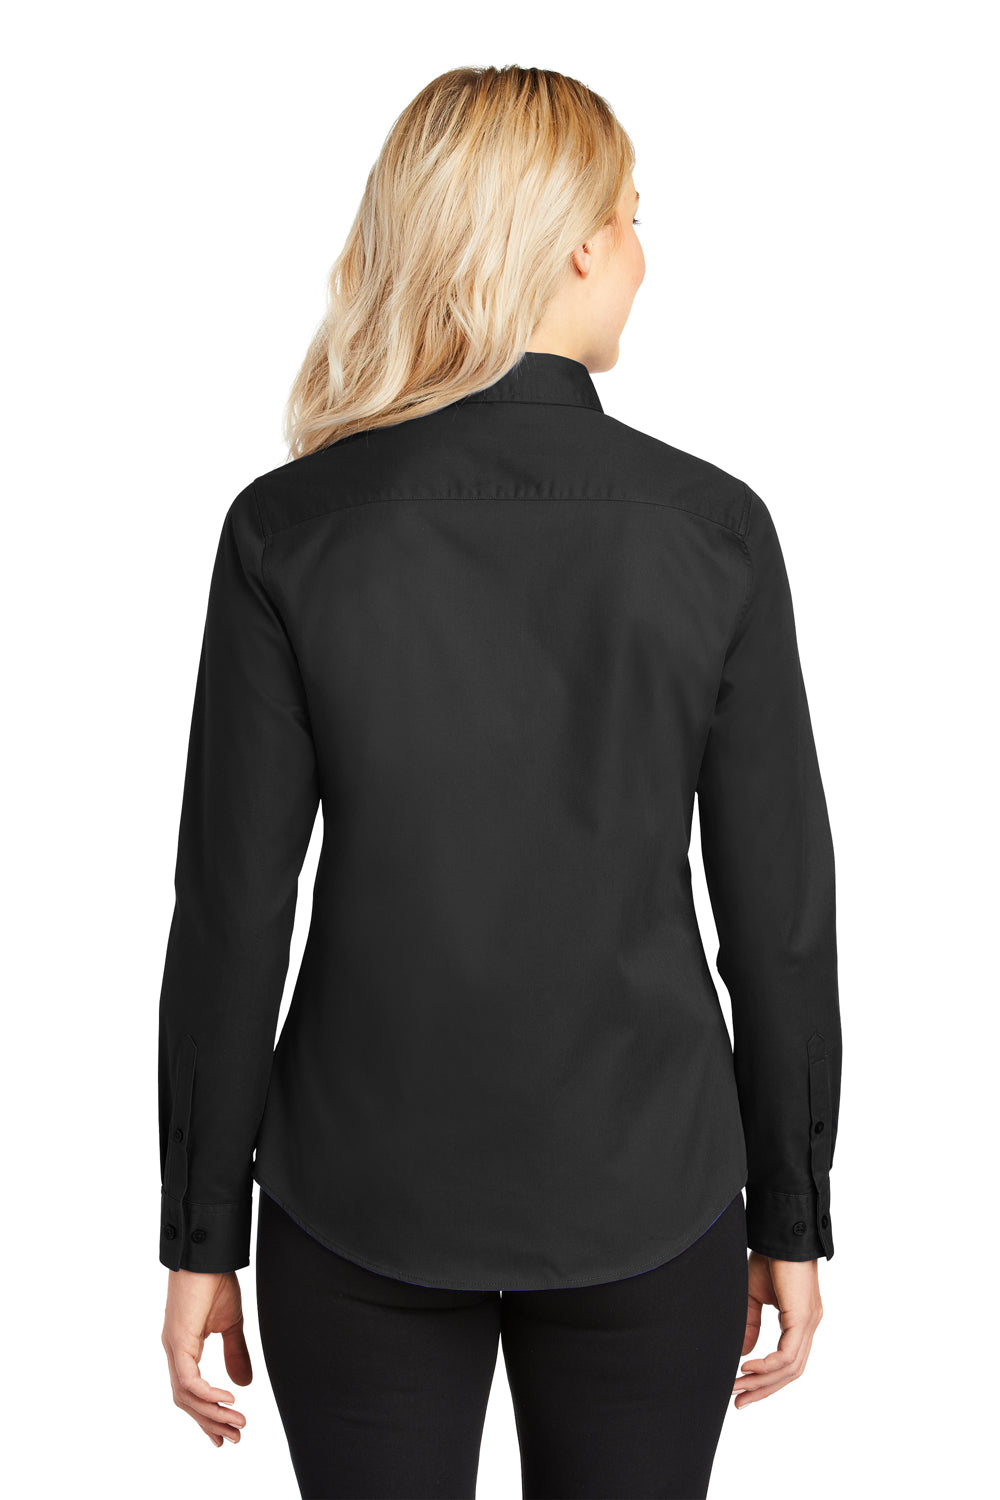 Port Authority L608 Womens Easy Care Wrinkle Resistant Long Sleeve Button Down Shirt Black Back